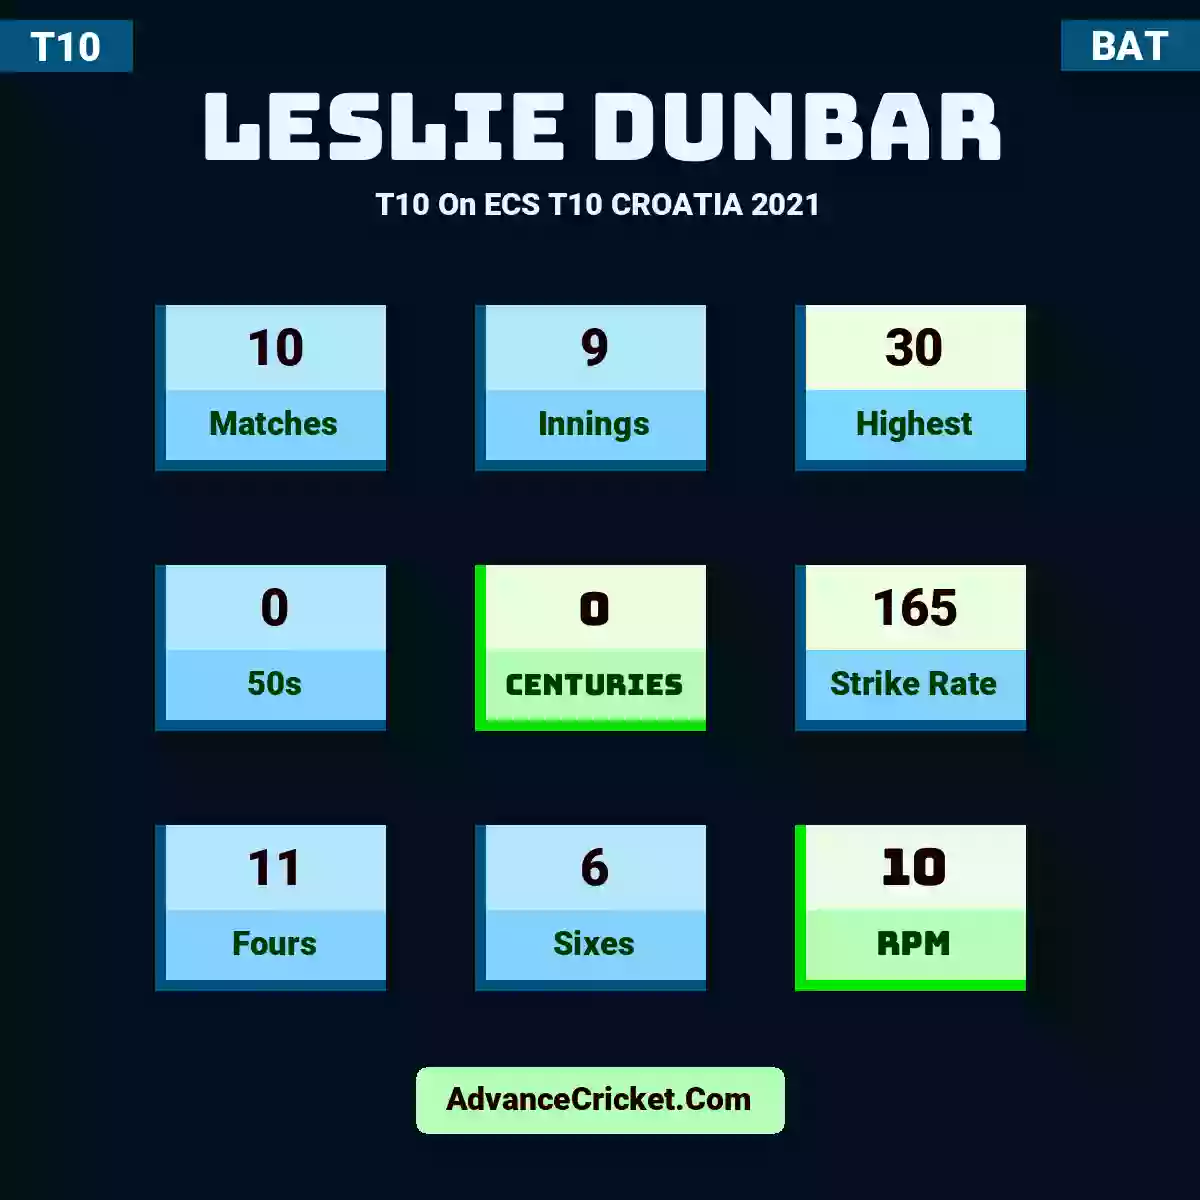 Leslie Dunbar T10  On ECS T10 CROATIA 2021, Leslie Dunbar played 10 matches, scored 30 runs as highest, 0 half-centuries, and 0 centuries, with a strike rate of 165. L.Dunbar hit 11 fours and 6 sixes, with an RPM of 10.